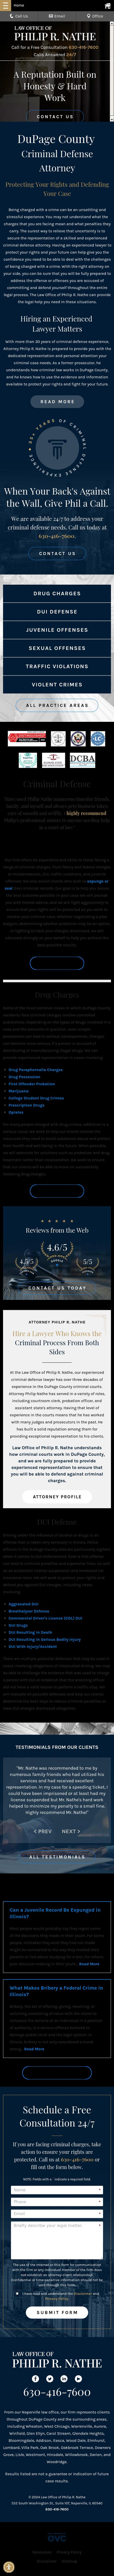 Law Office of Philip R. Nathe - Naperville IL Lawyers